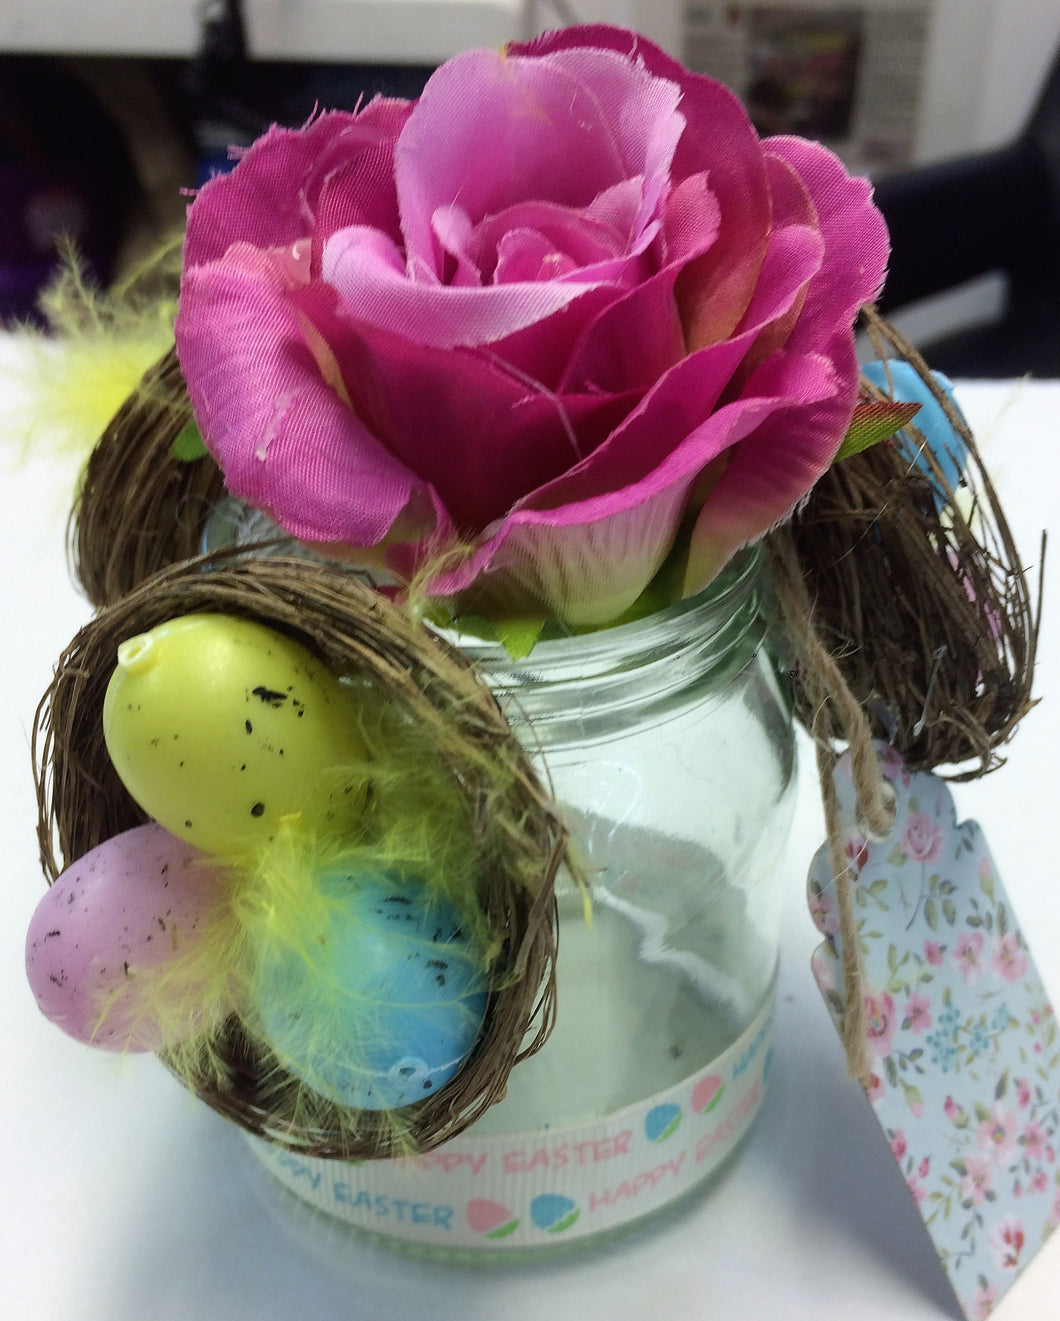 Beautiful handcrafted Easter rose complete with egg nests